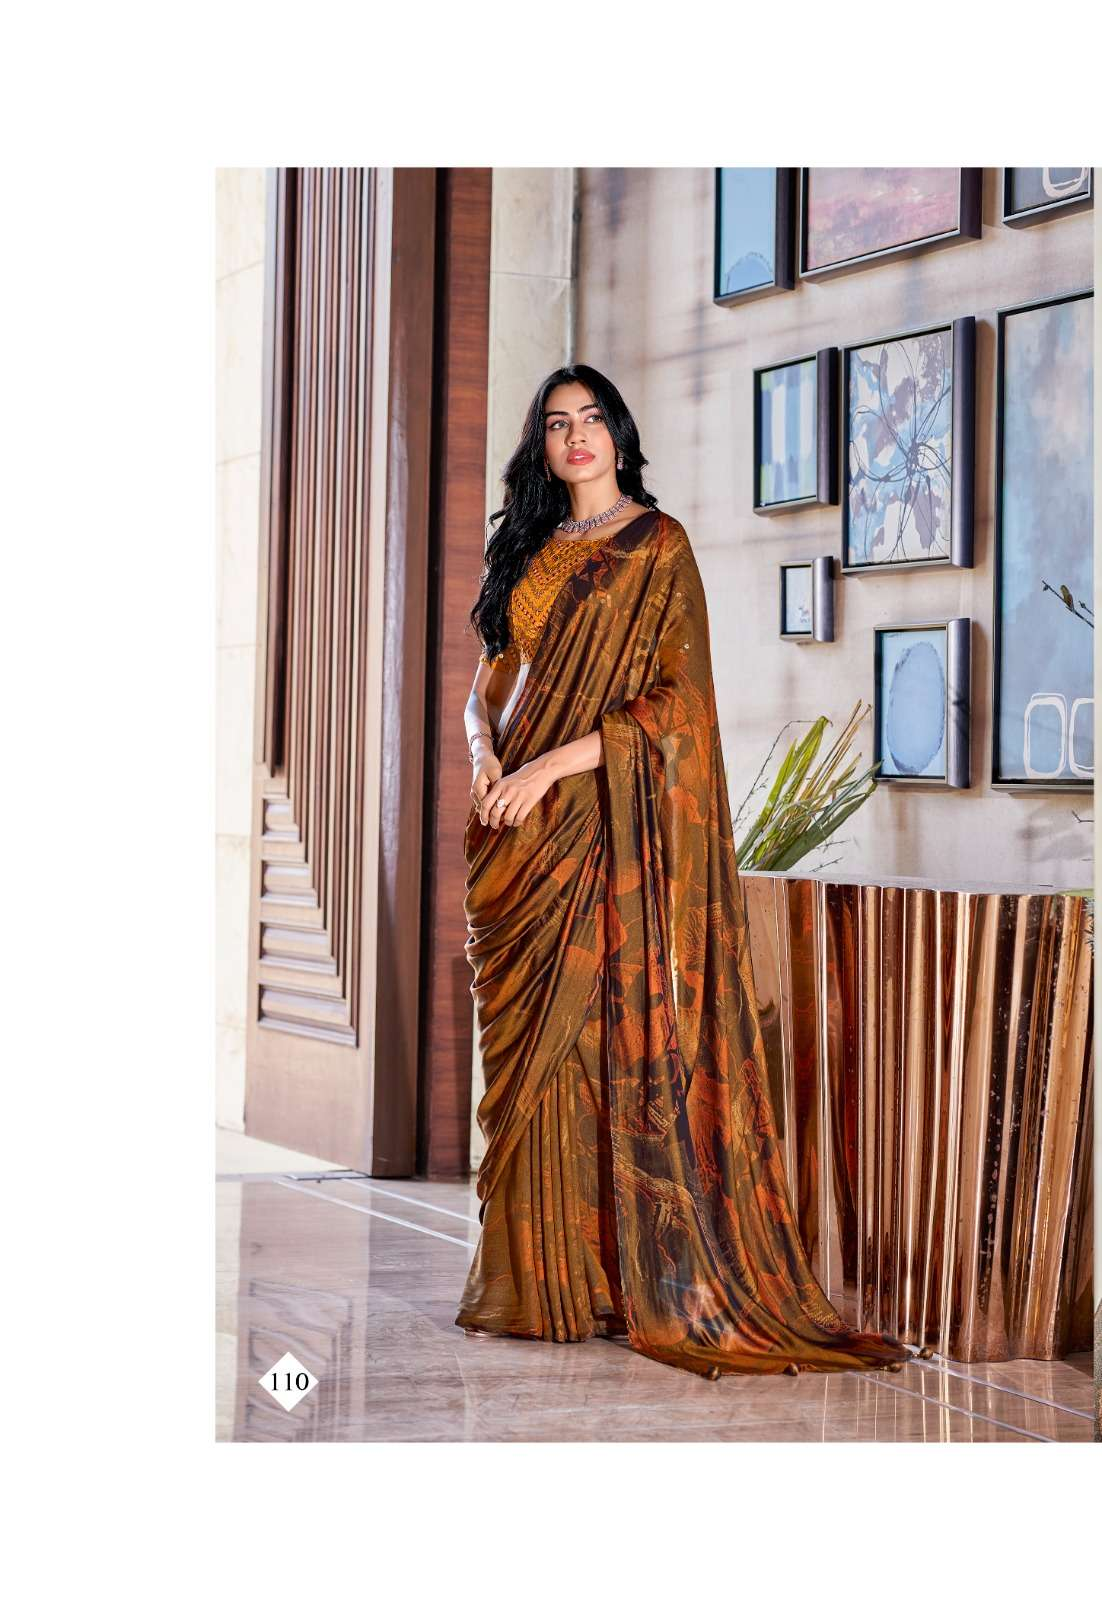 Luxurious Drapes: Styling in Velvet Sarees